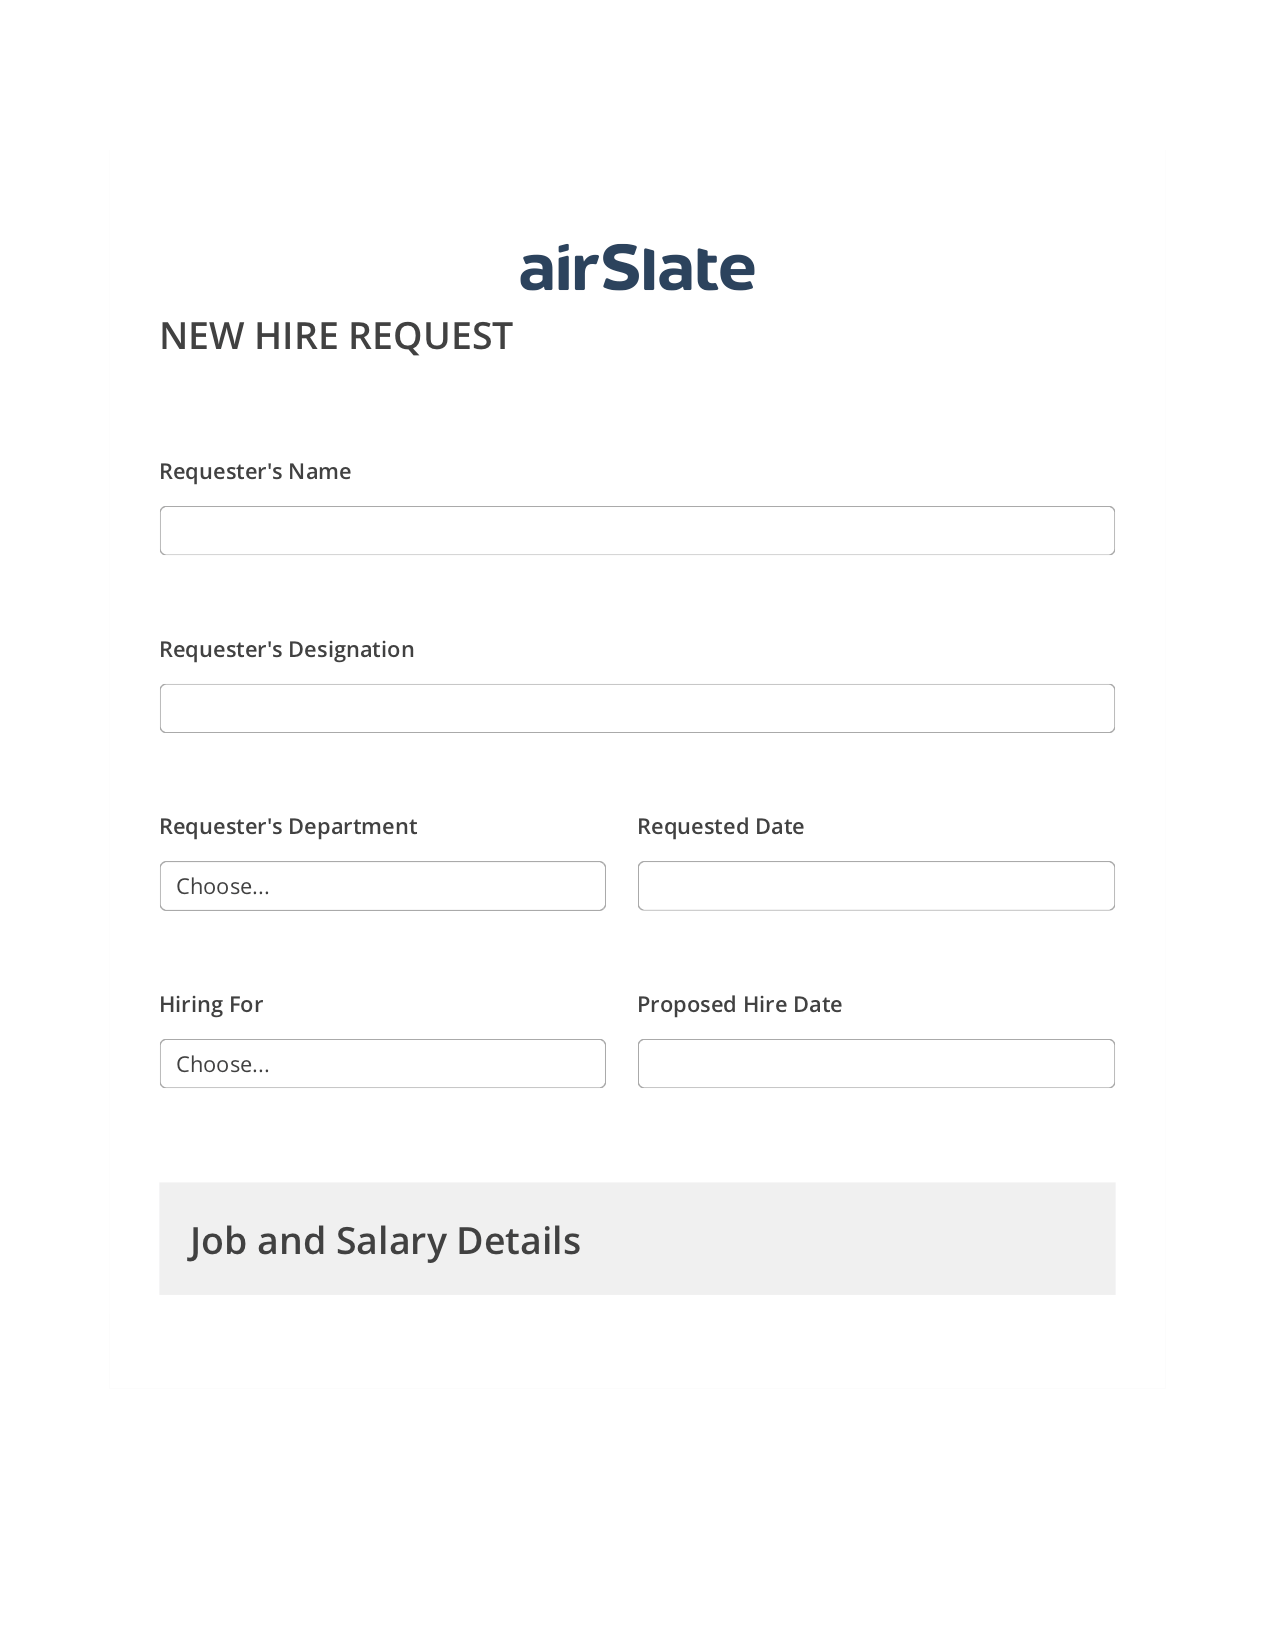 Hiring Request Workflow Pre-fill Dropdowns from CSV file Bot, Revoke Access Bot, Archive to Box Bot